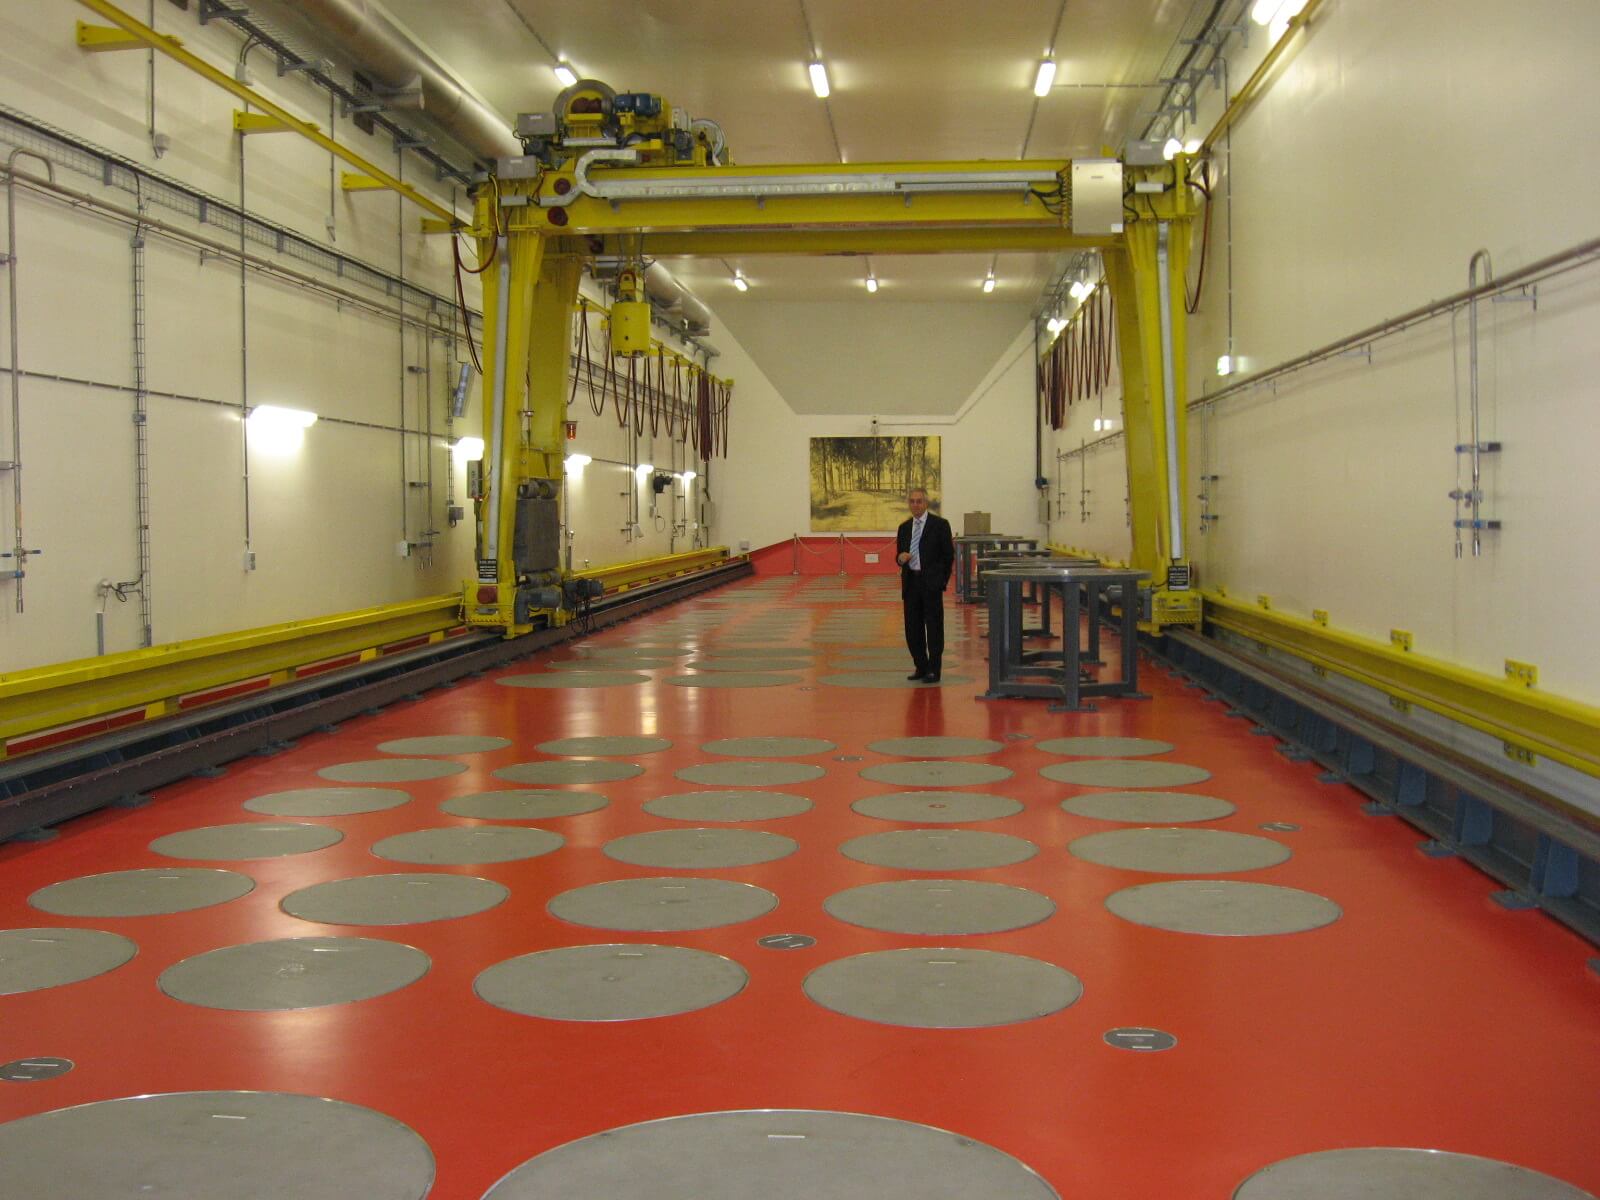 Inside the nuclear power plant in Borssele, the Netherlands. © RNW.org / Flickr